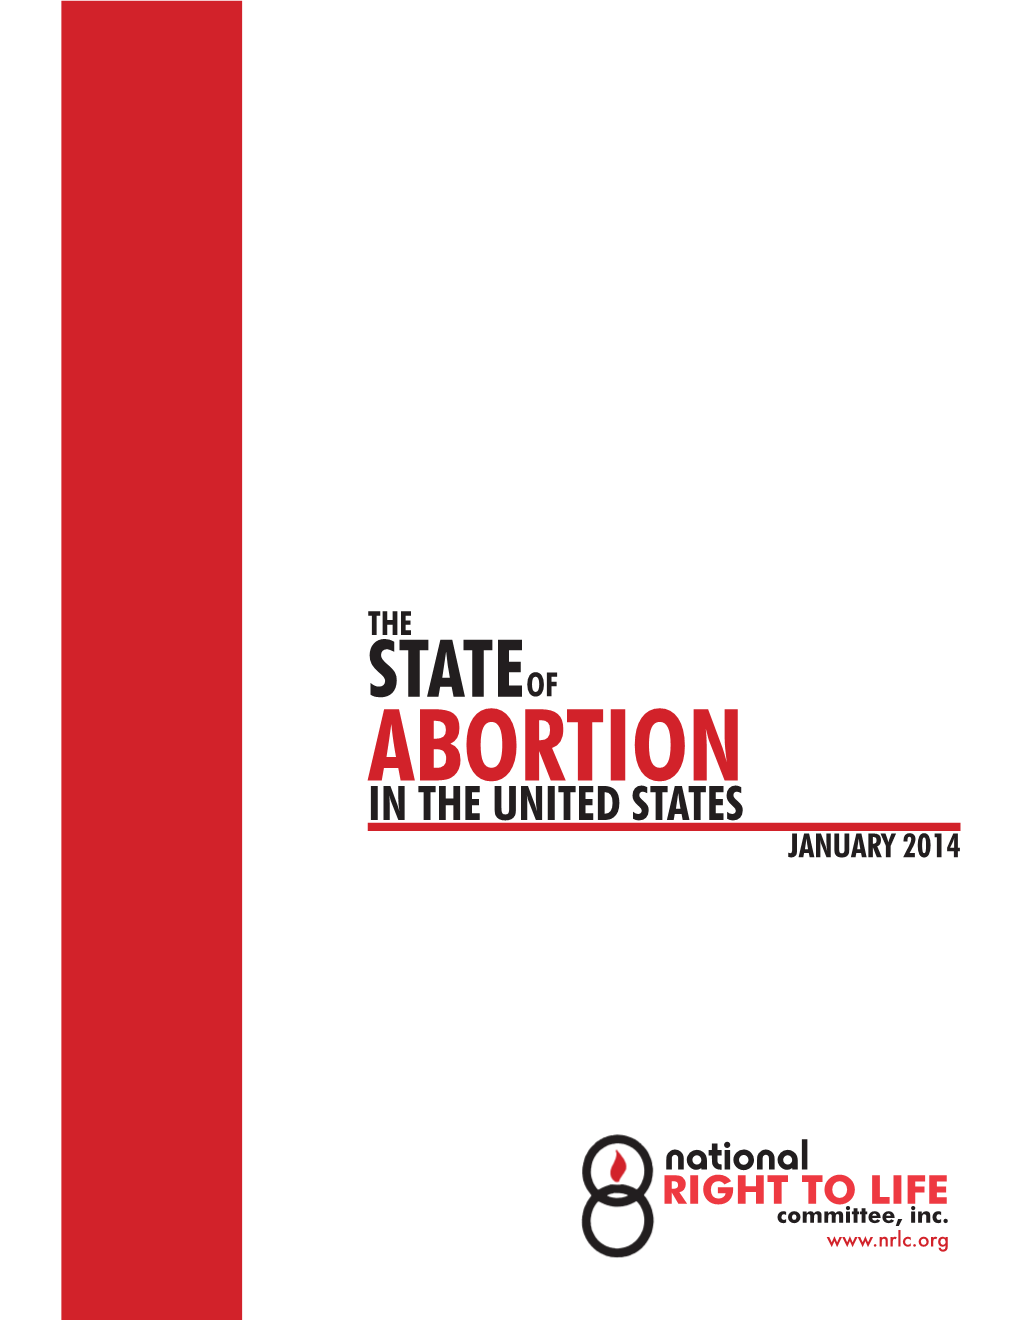 The State of Abortion in the United States Is a Report Issued by the National Right to Life Committee (NRLC)